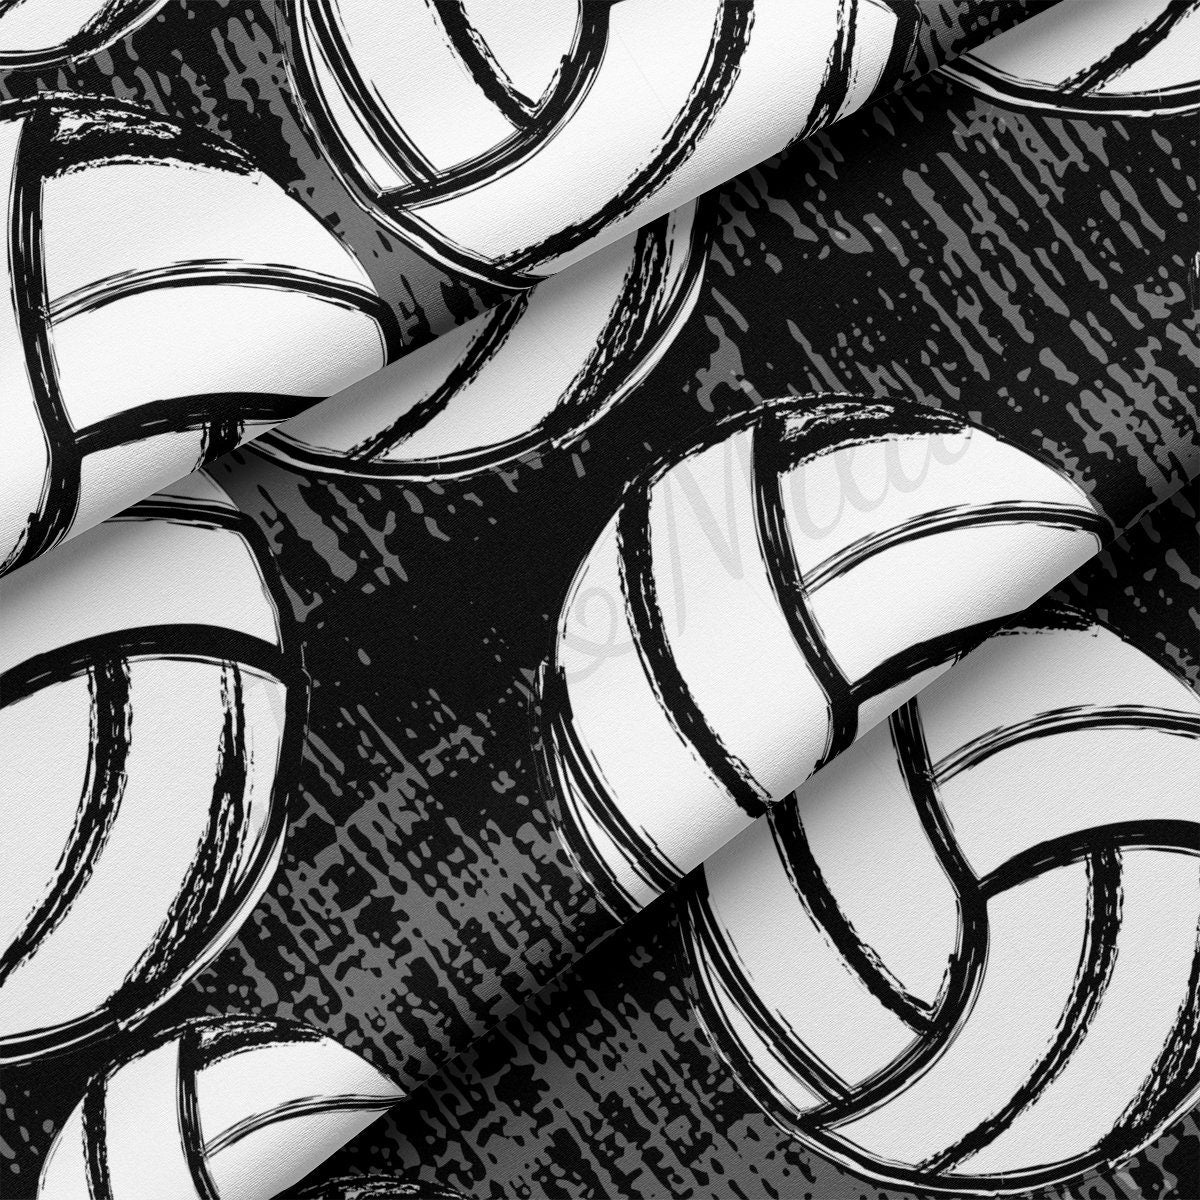 Volleyball DBP Fabric Double Brushed Polyester Fabric by the Yard DBP Jersey Stretchy Soft Polyester Stretch Fabric DBP1987